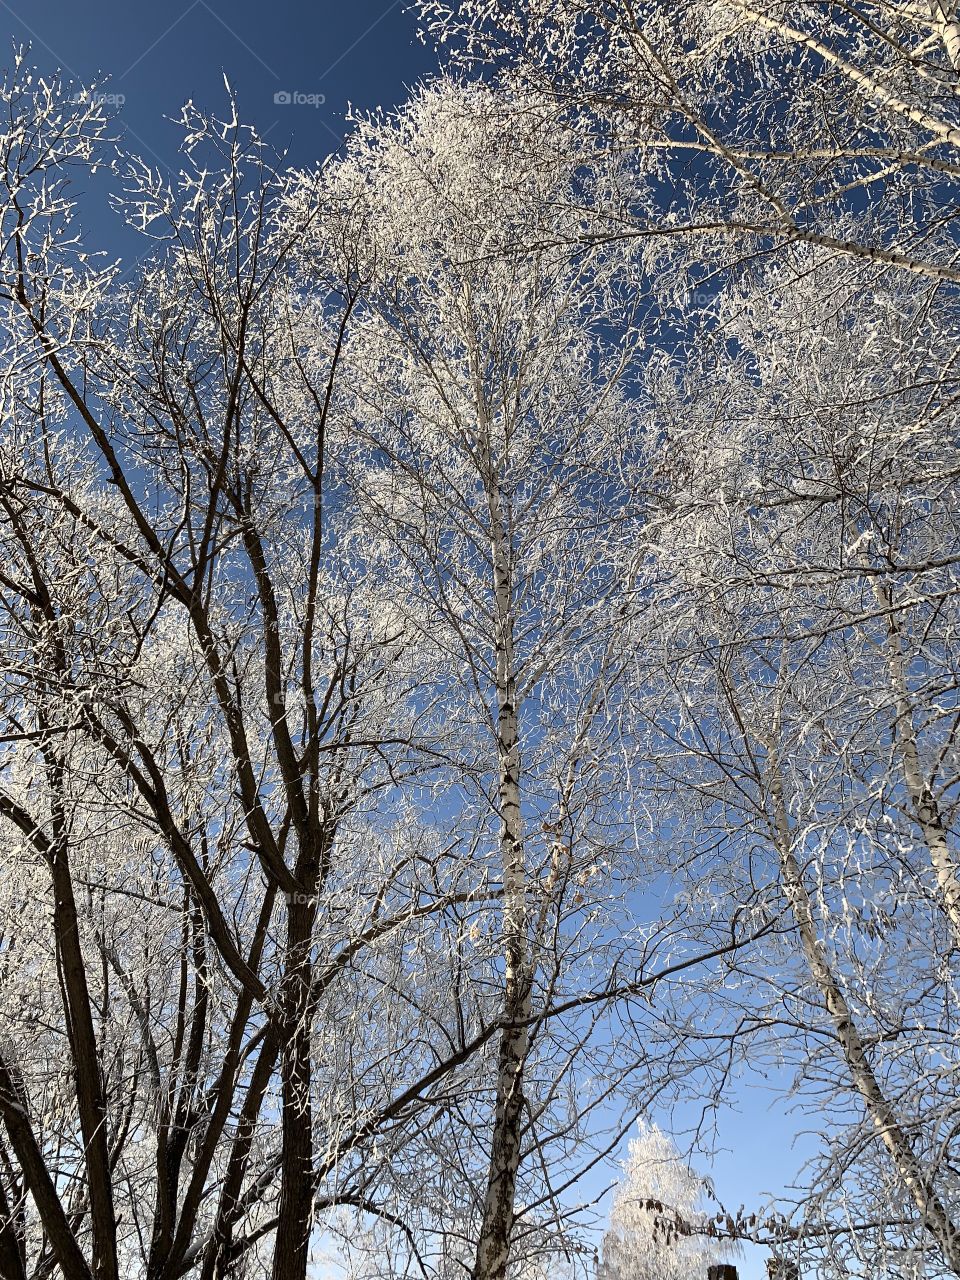 Trees in winter. The branches are covered with hoarfrost sparkling in the sun.